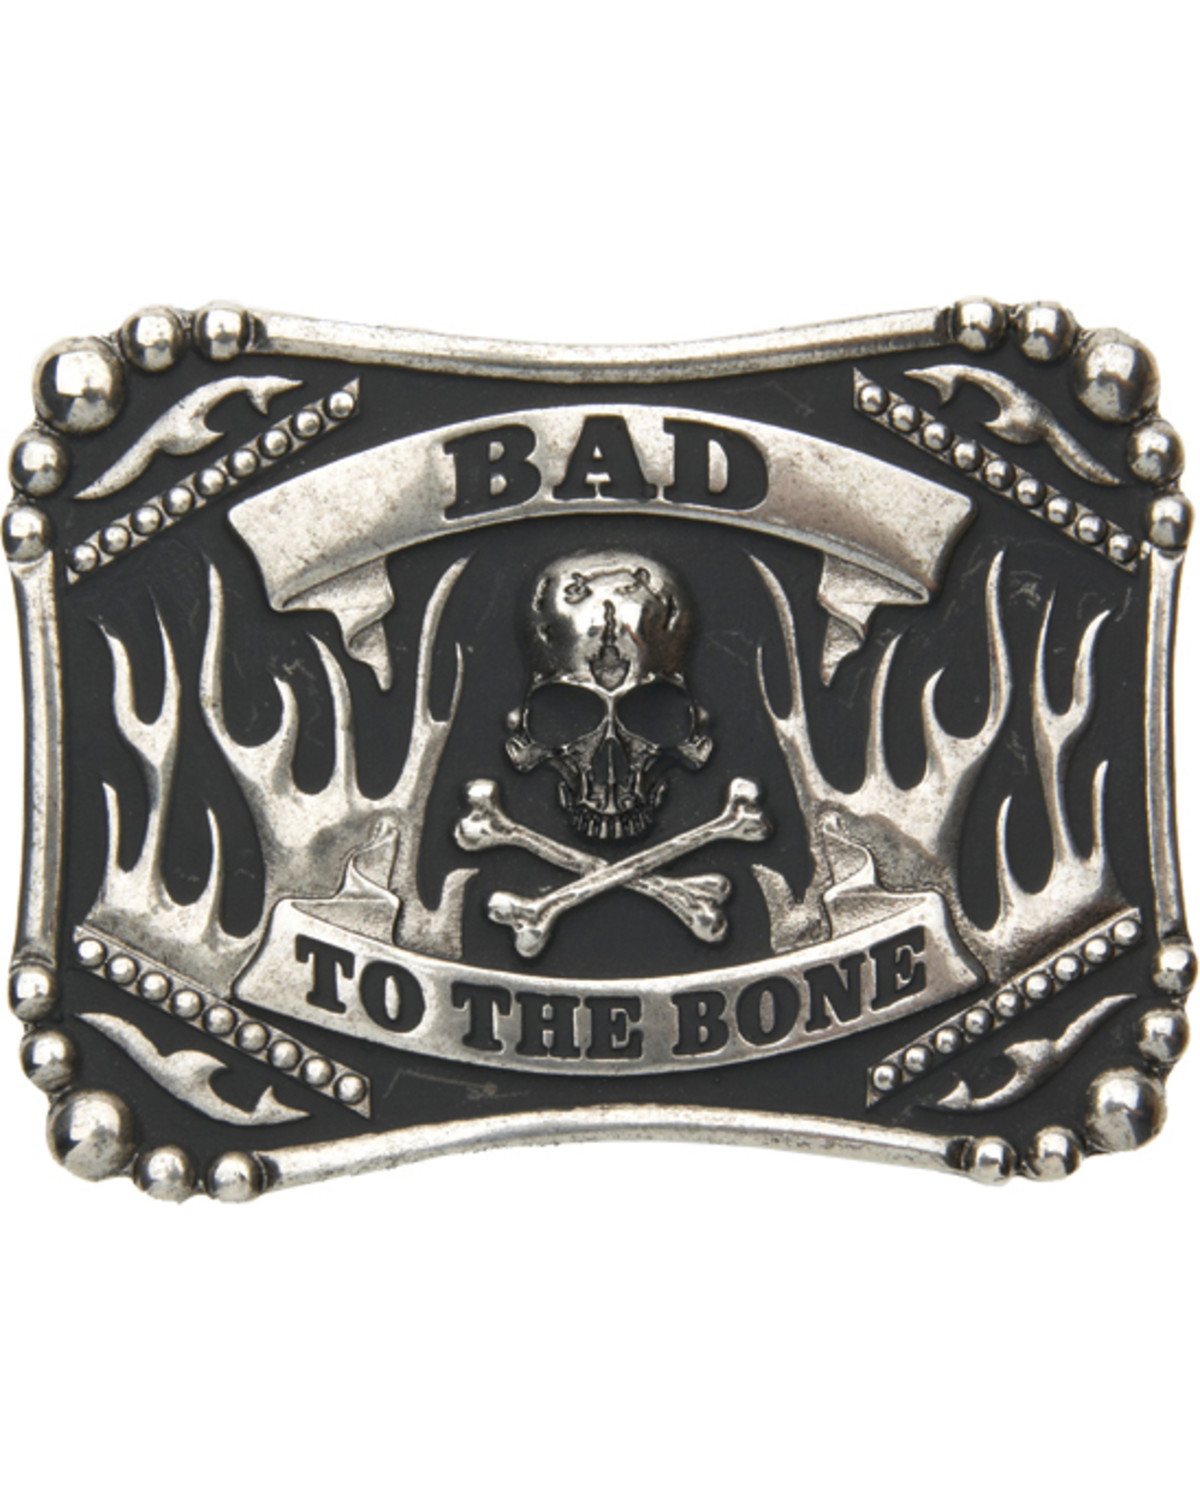 AndWest Men's Bad to the Bone Belt Buckle